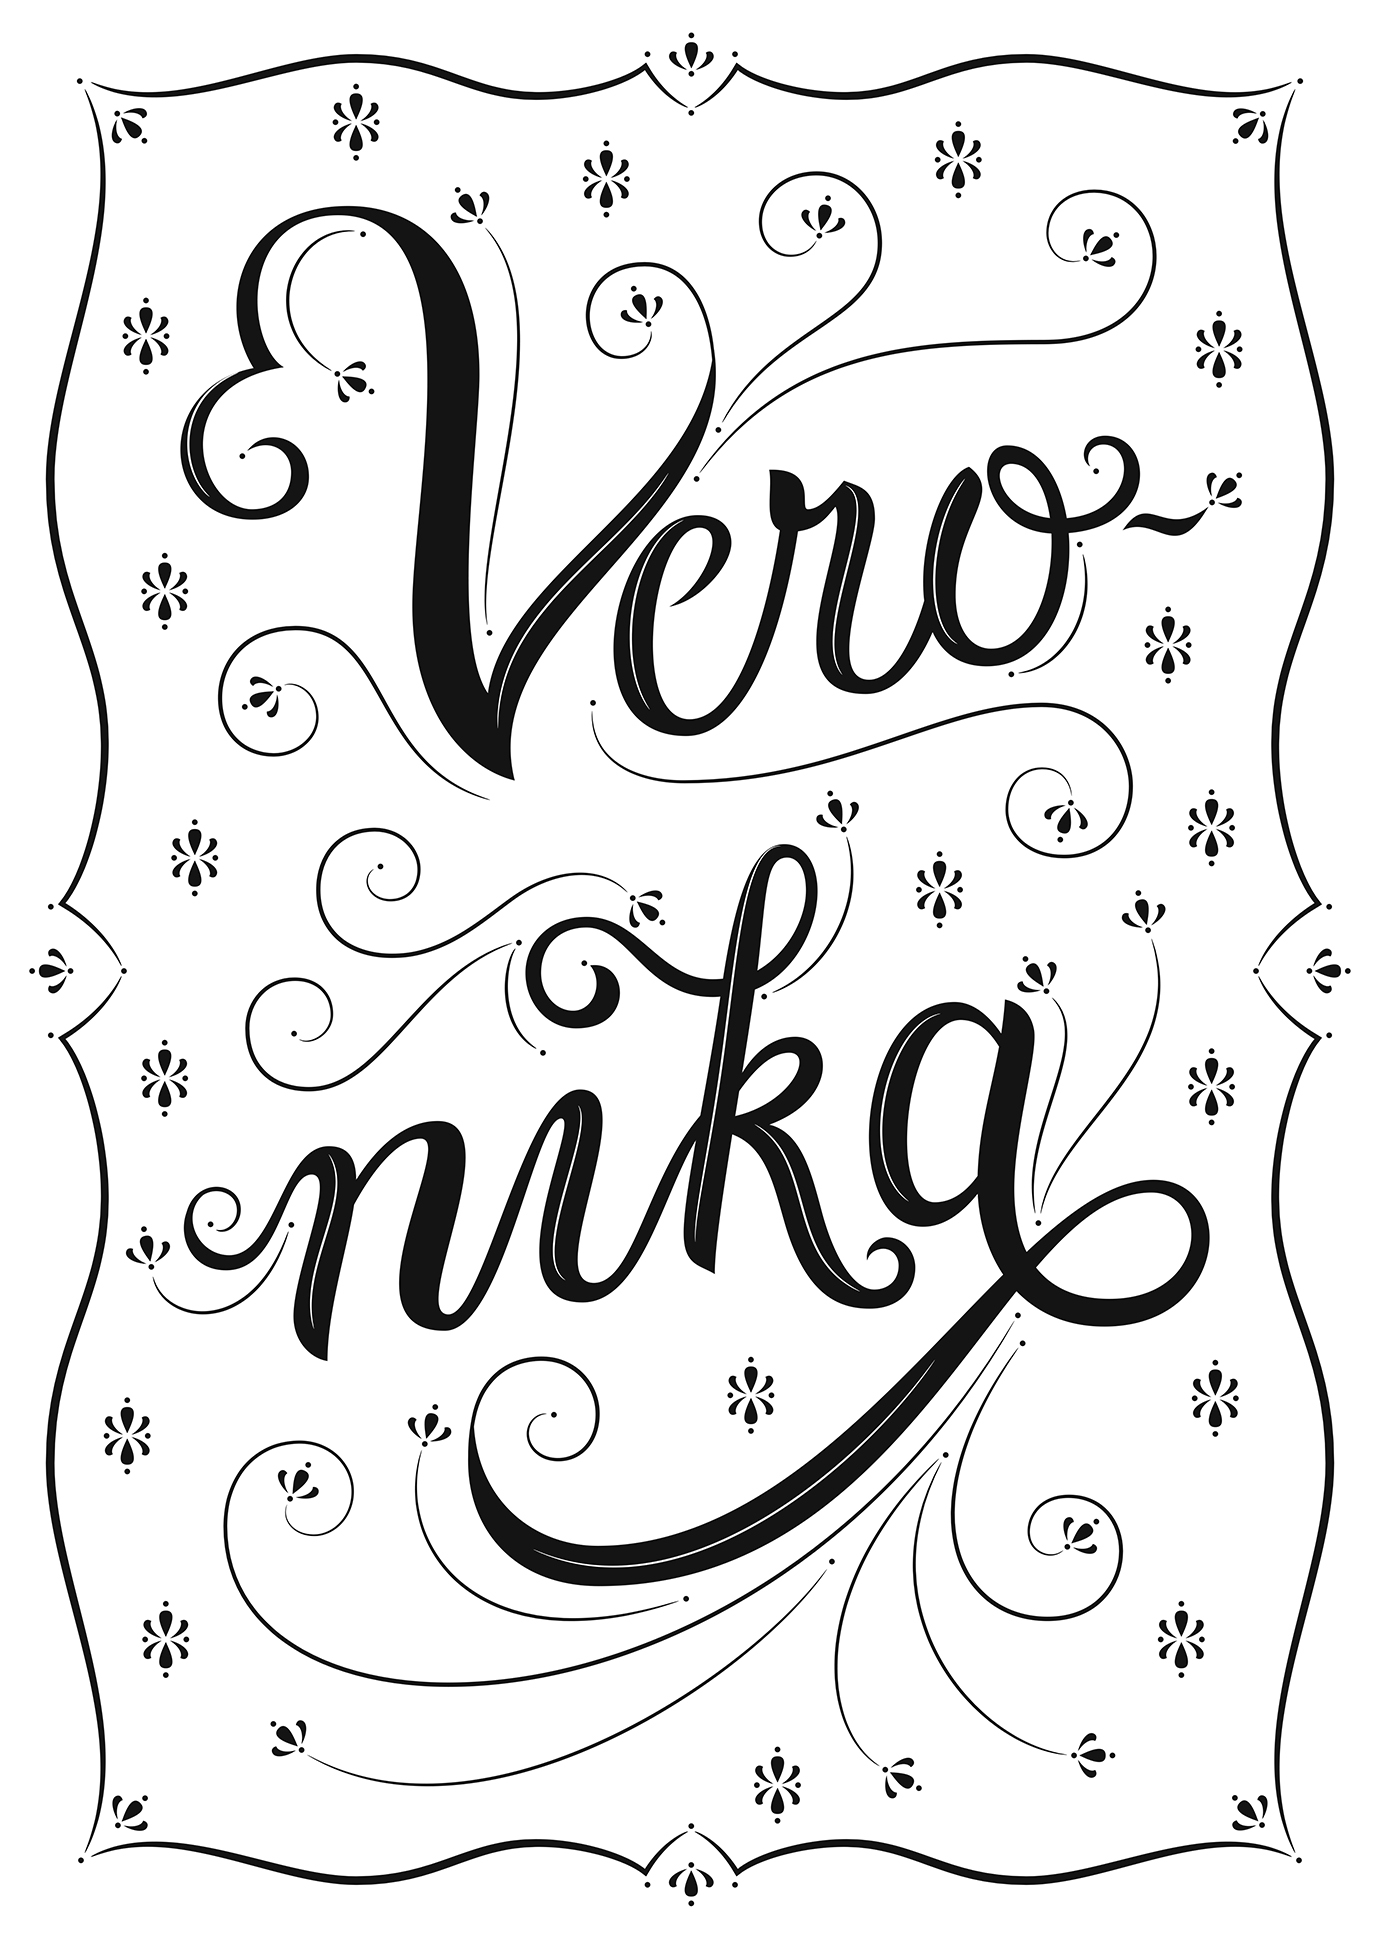 Lettering piece "Veronika" black and white